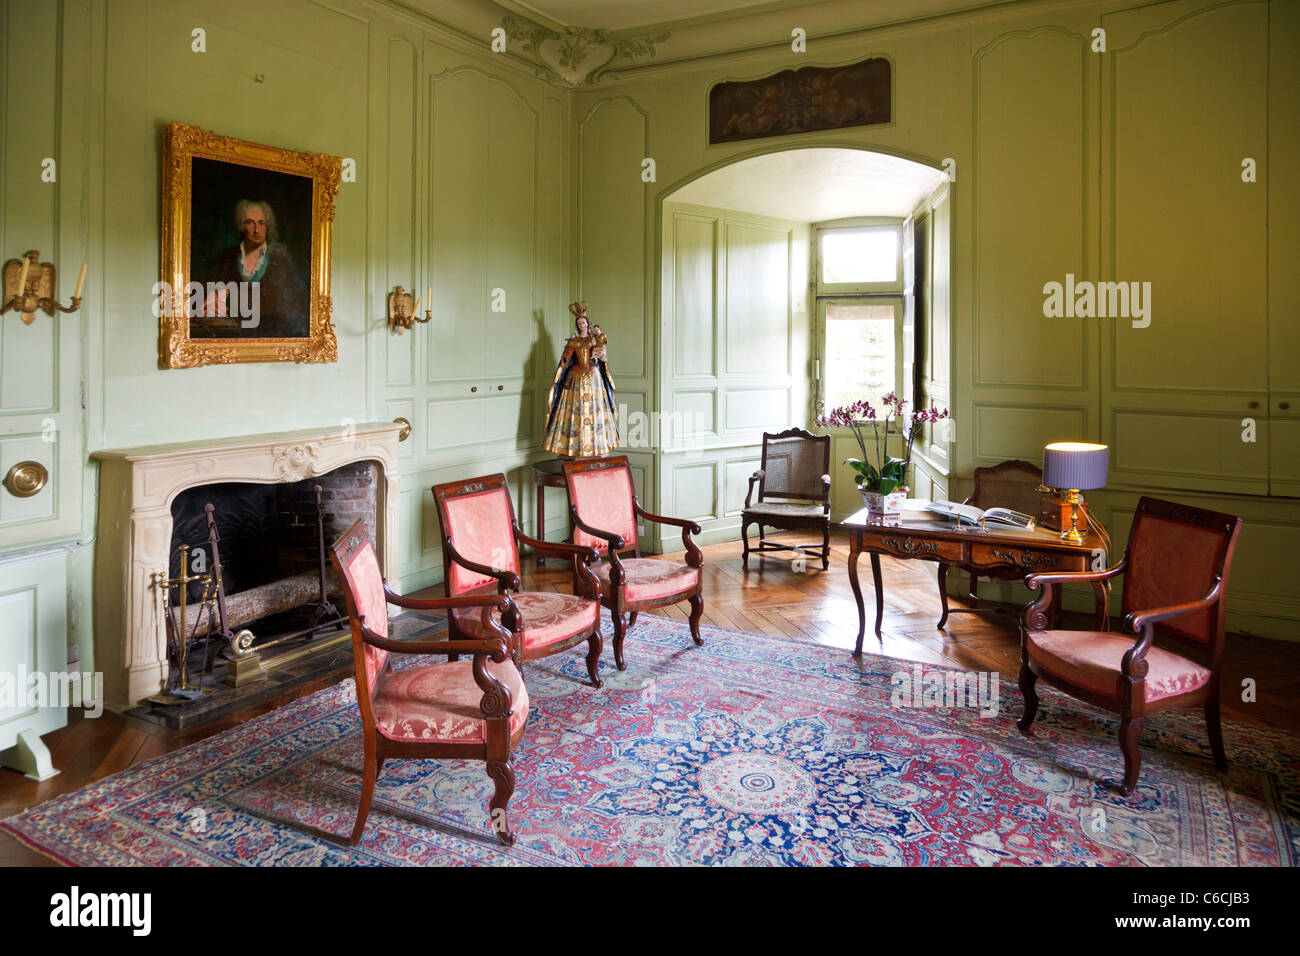 Living room at chateau Villandry, Indre et Loire, France, Europe Stock Photo